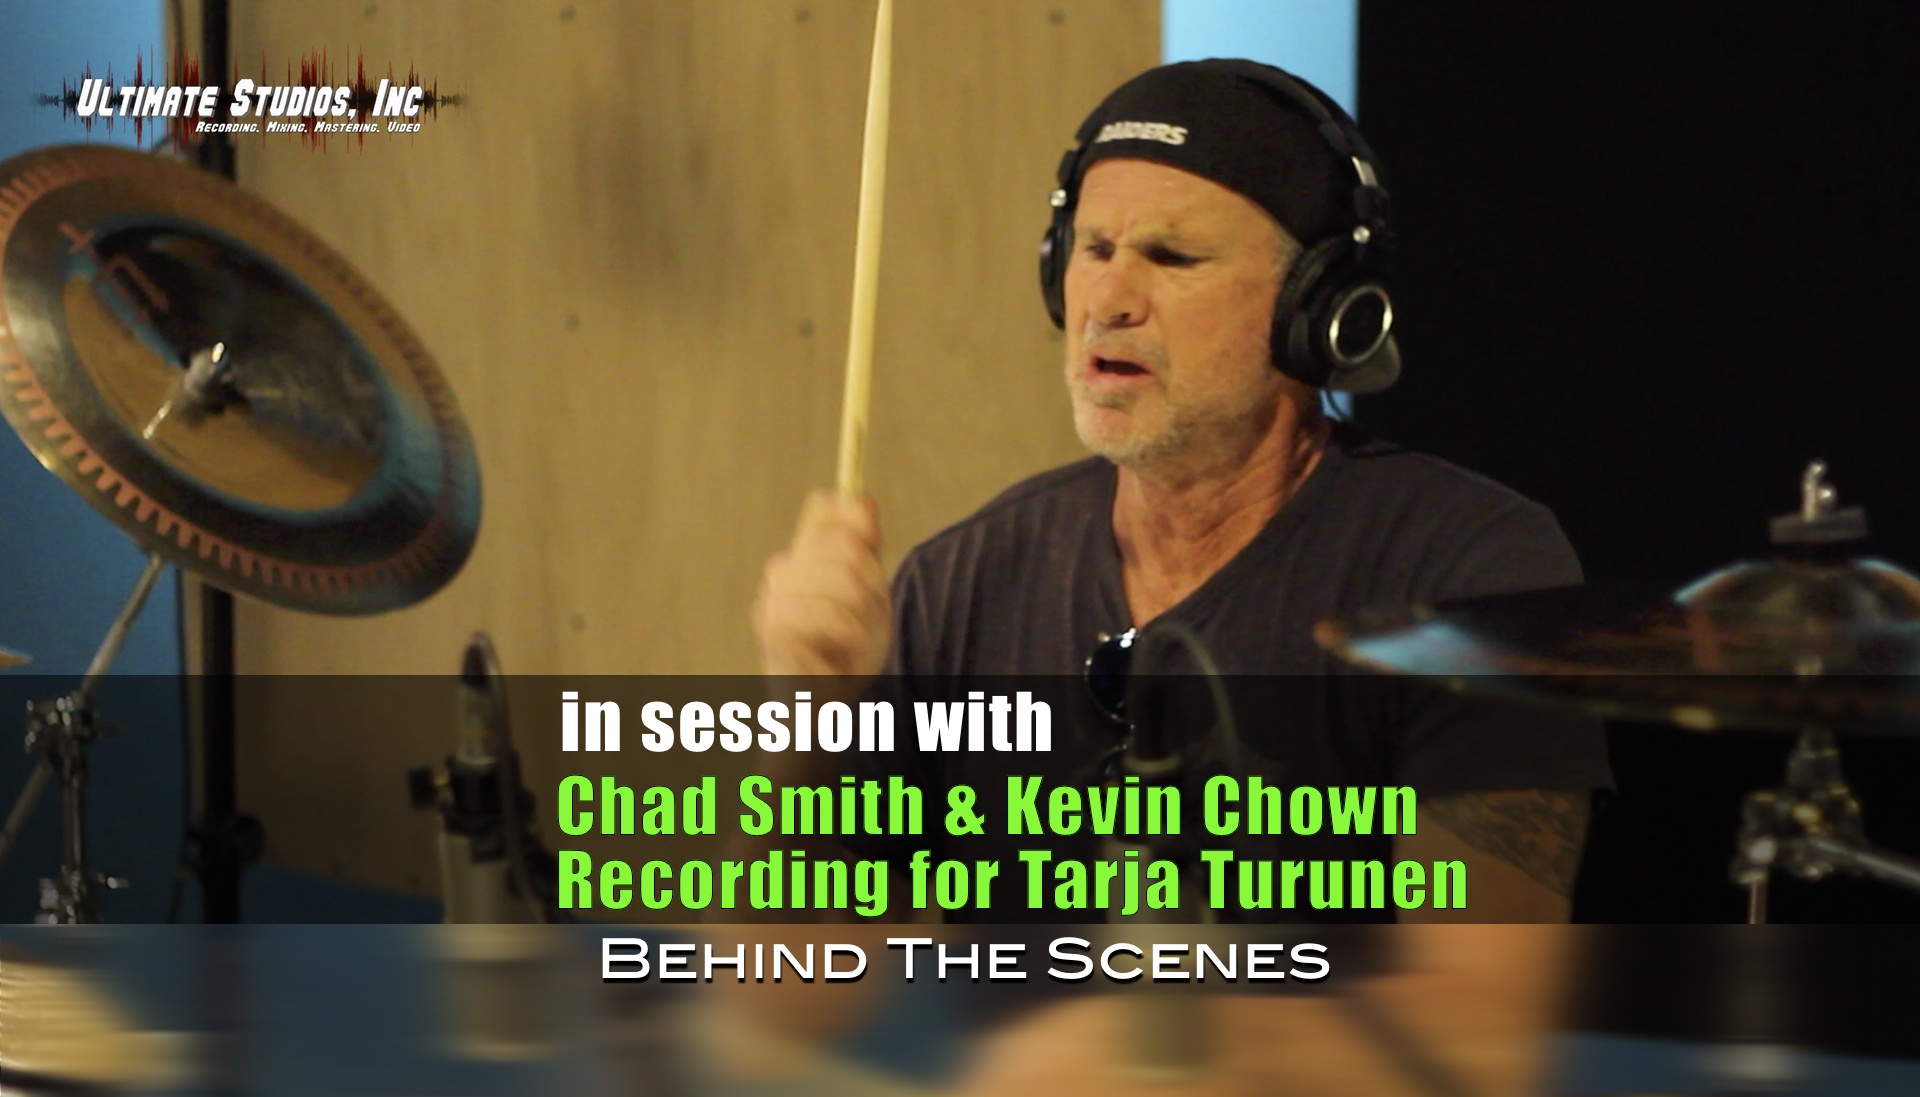 Recording with Chad Smith & Kevin Chown for Tarja Turunen